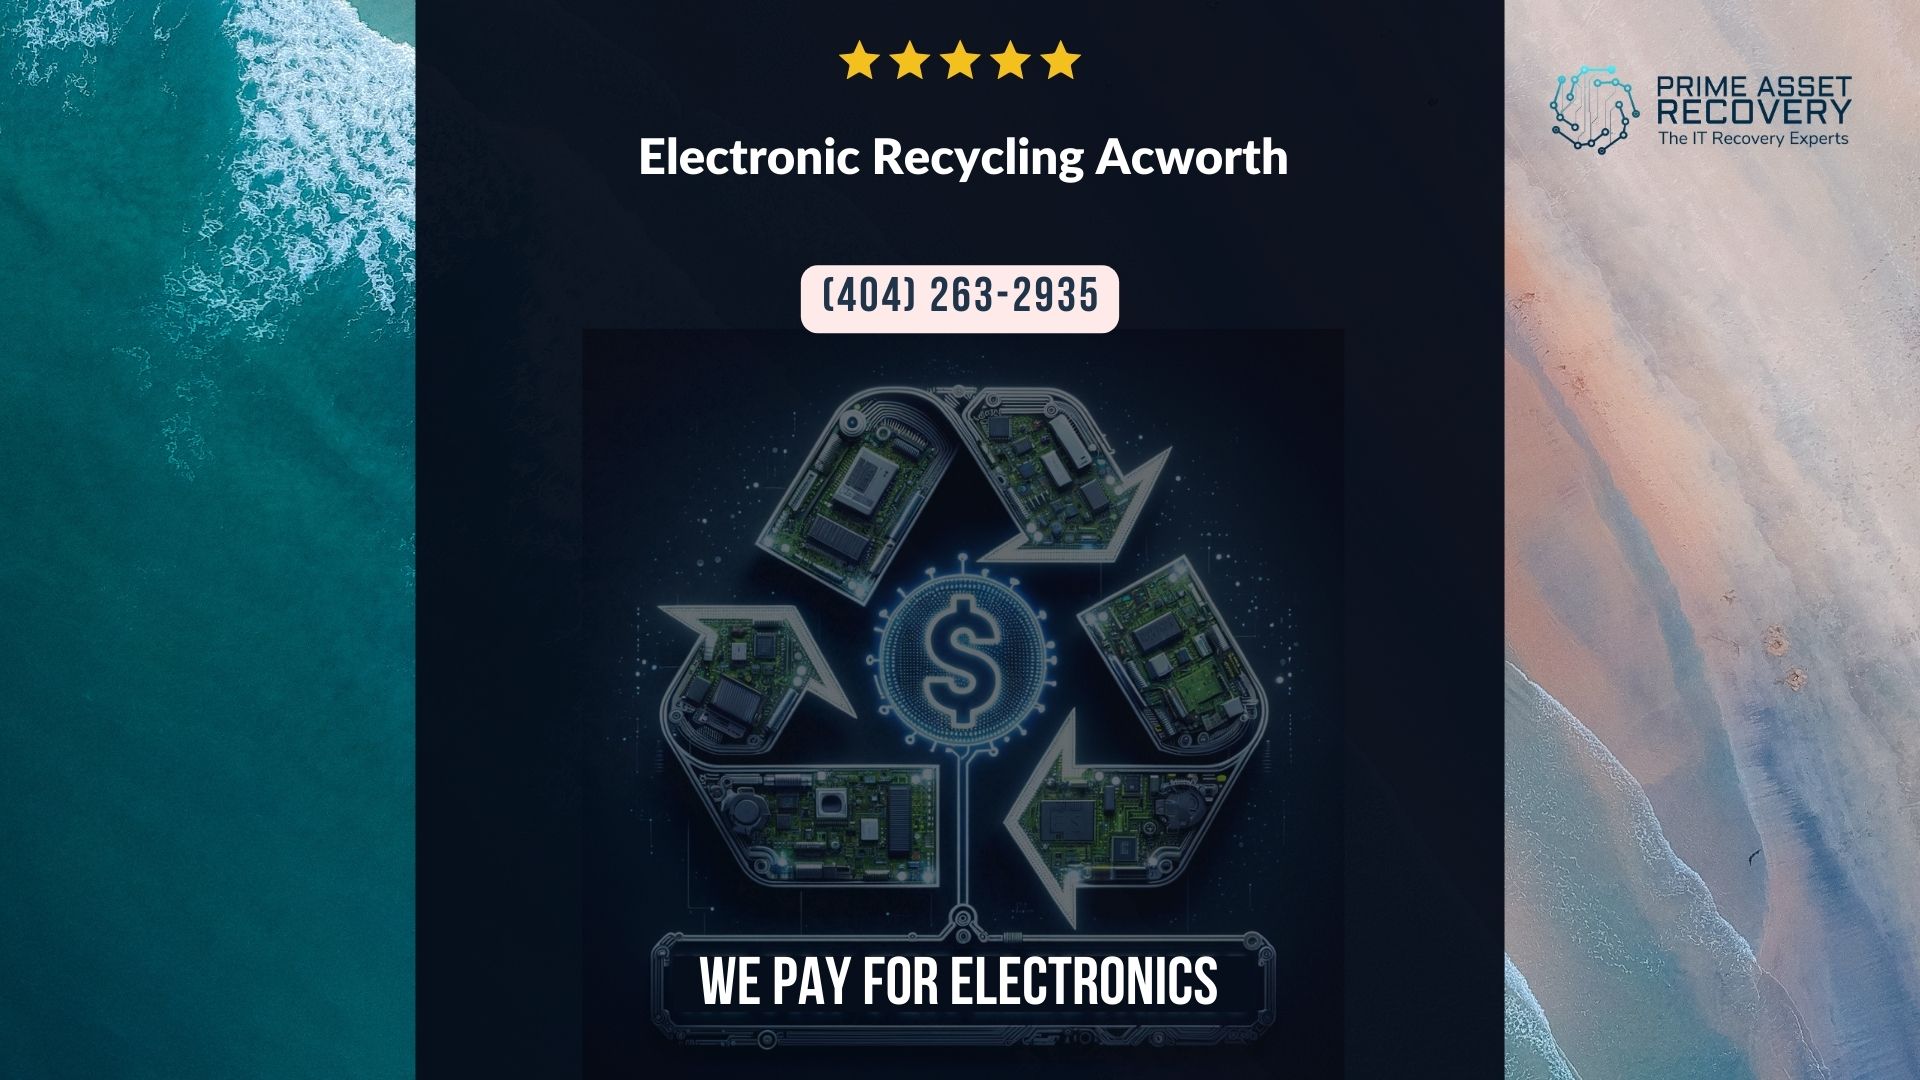 Electronic Recycling Acworth - Prime Asset Recovery Your Partner in Responsible Electronics Recycling